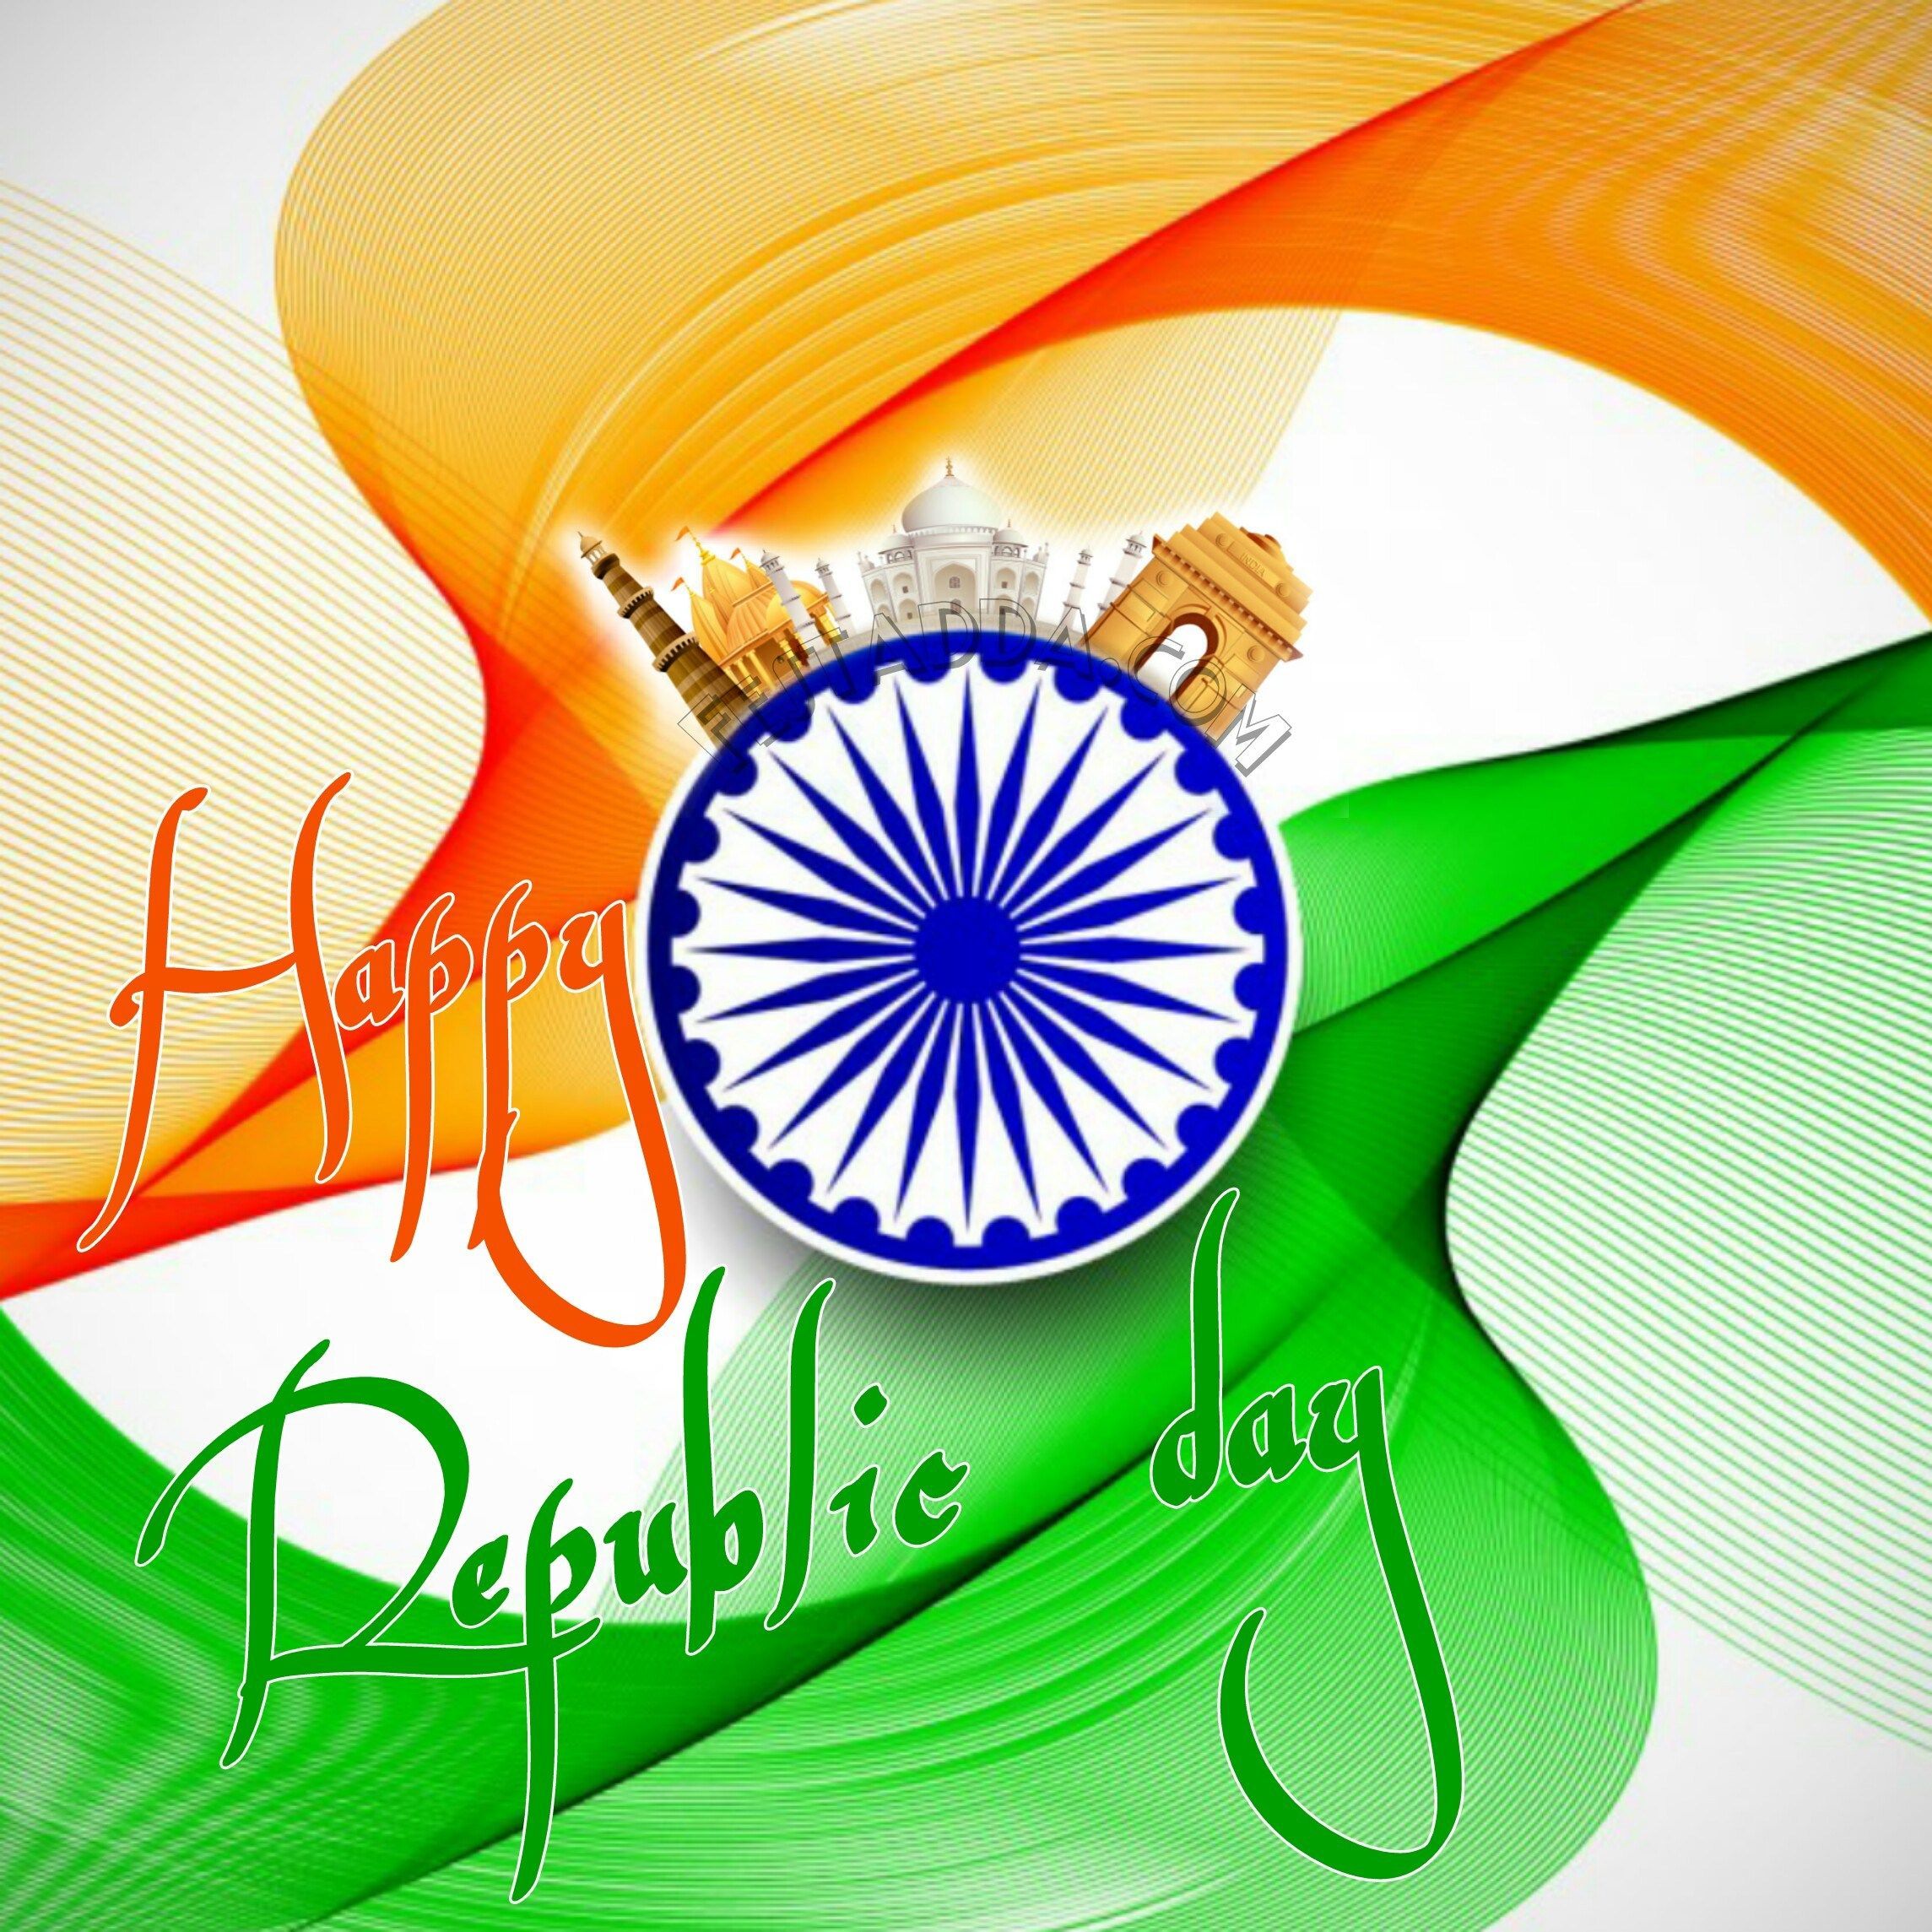 26th January Photo For Whatsapp DP. Indian flag wallpaper, Republic day, Indian flag image